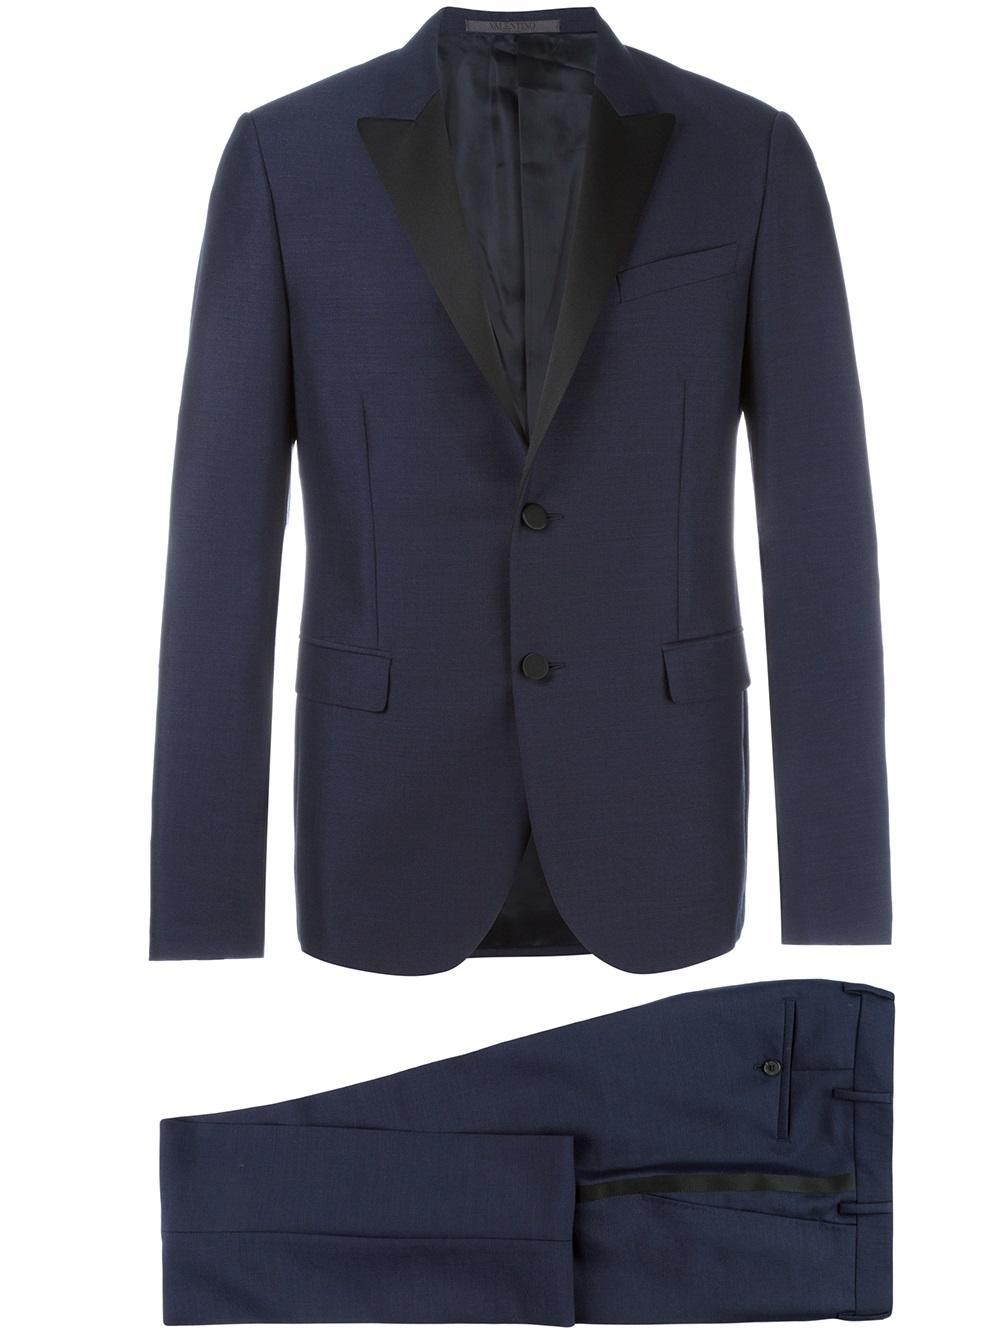 Lyst - Valentino Two Piece Suit in Blue for Men